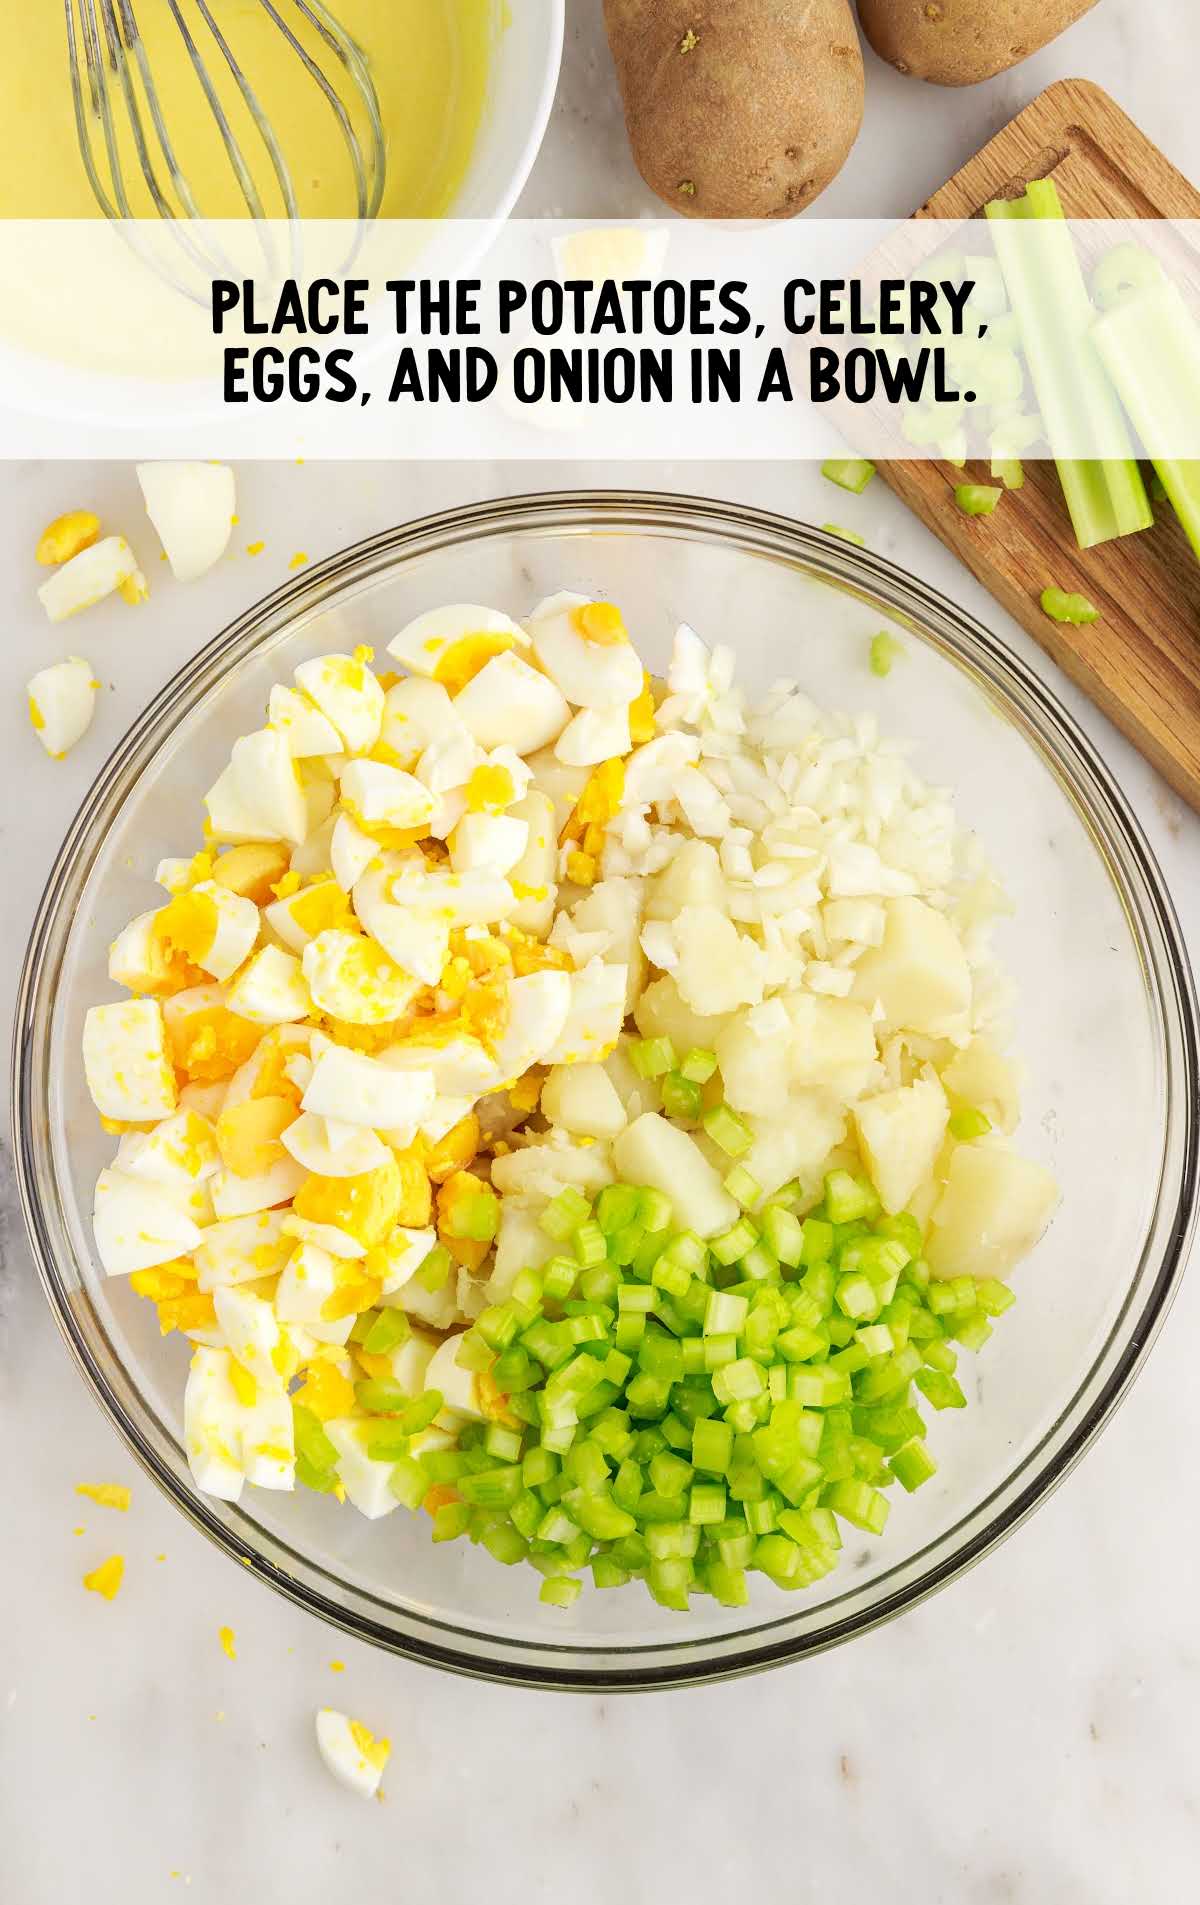 potatoes, celery, eggs, and onion placed in a bowl